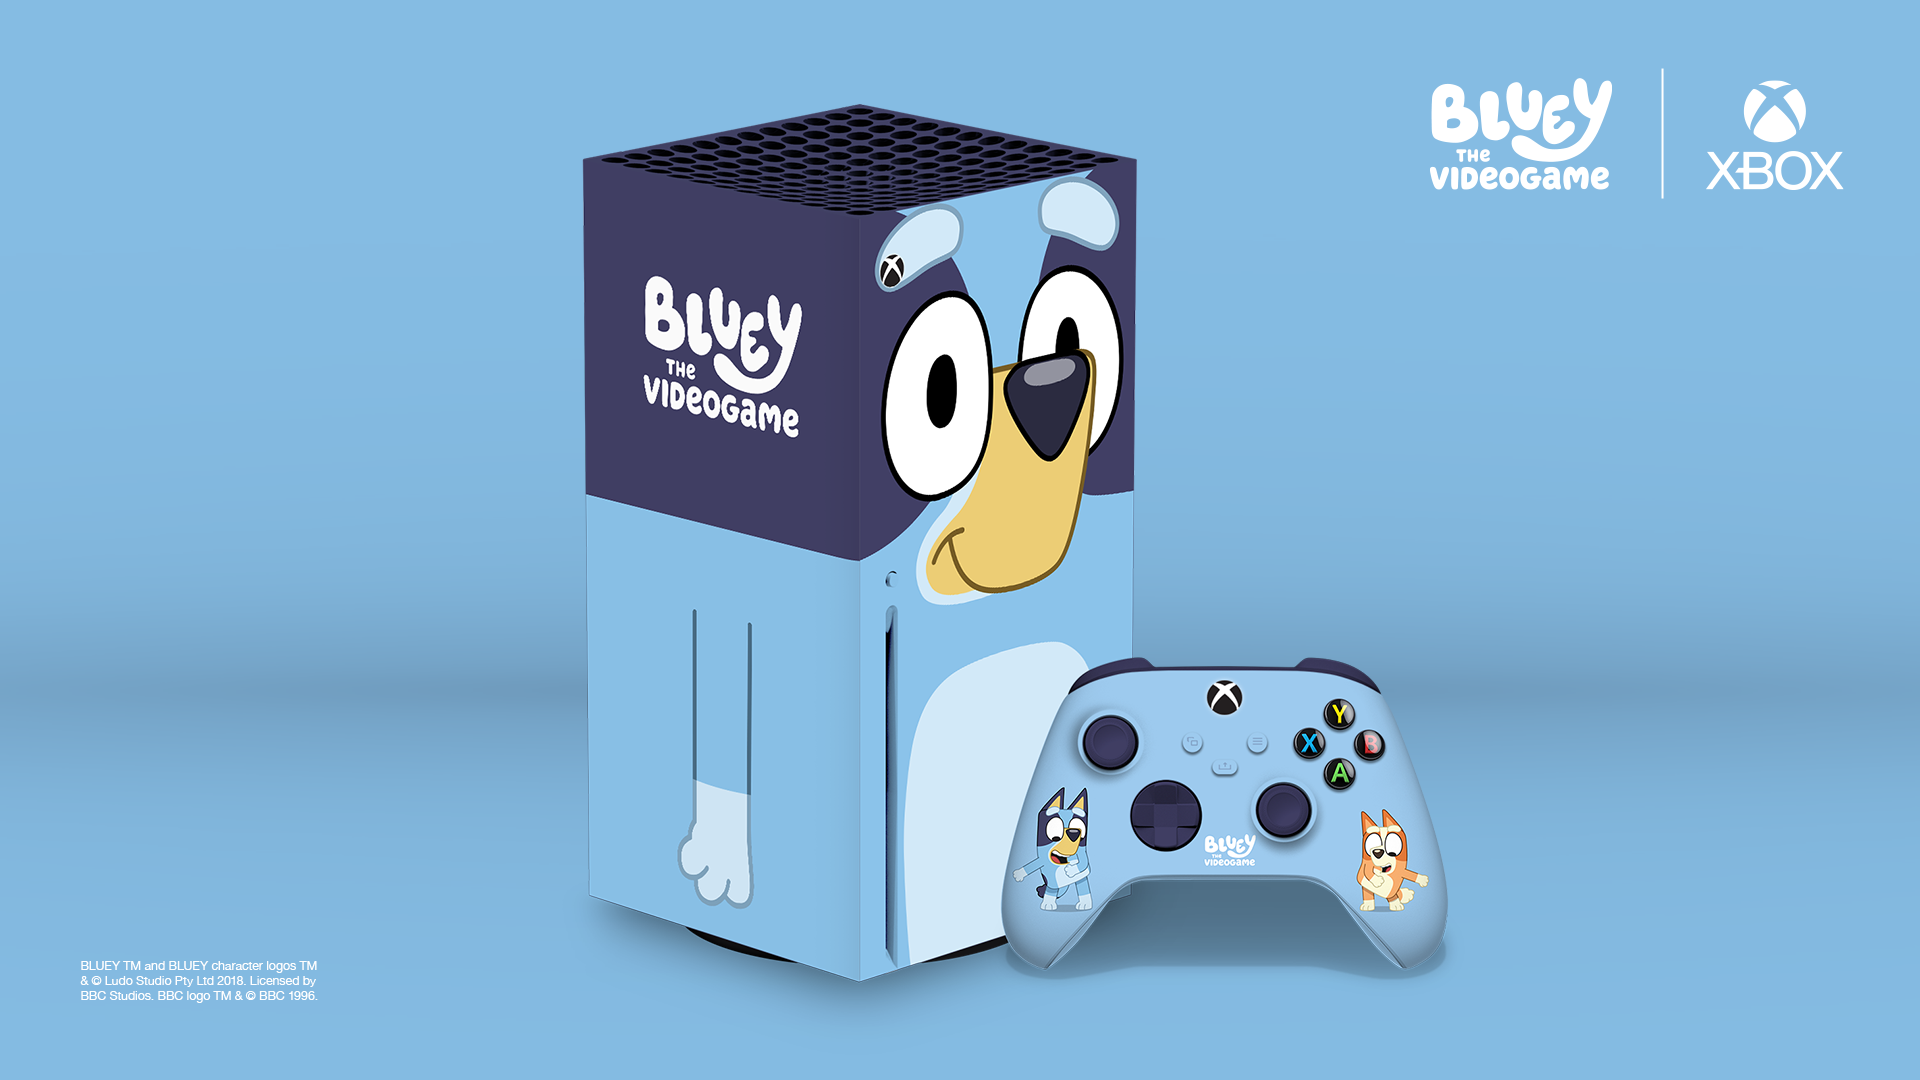 Xbox is giving away a Bluey Series X console